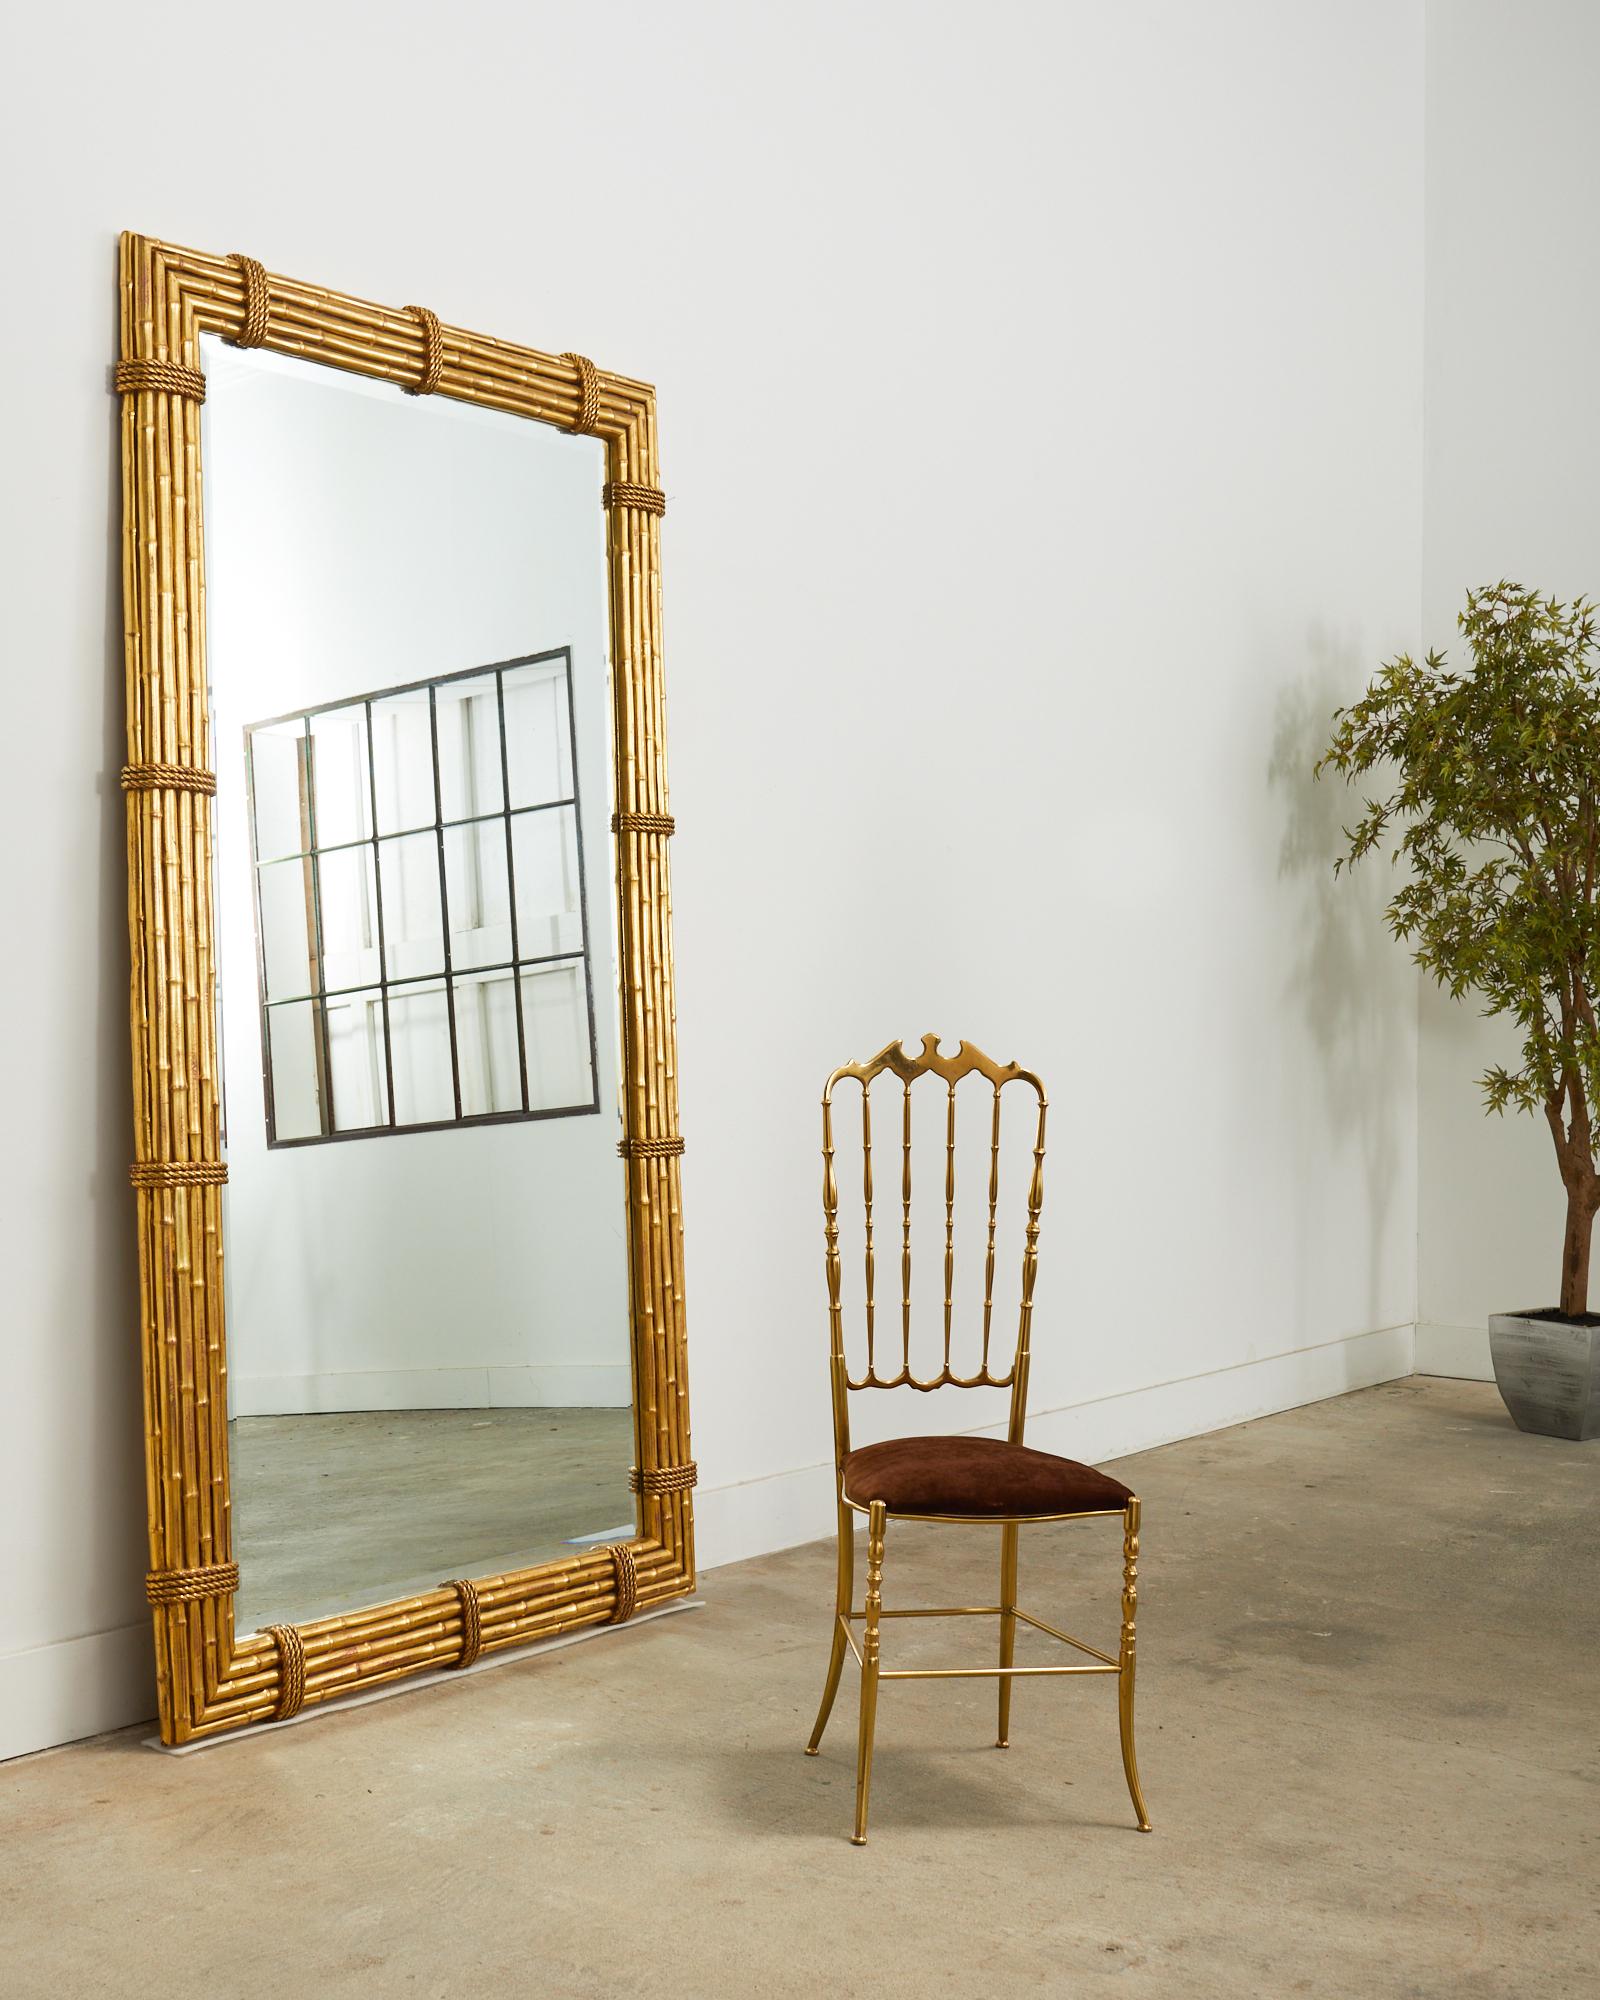 Grand 20th century Hollywood Italian Regency floor mirror made on a monumental scale. The mirror features a 5.5 inch thick wood frame hand-carved by Italian artisans with faux bamboo poles bundled together with faux rope strapping. The frame was